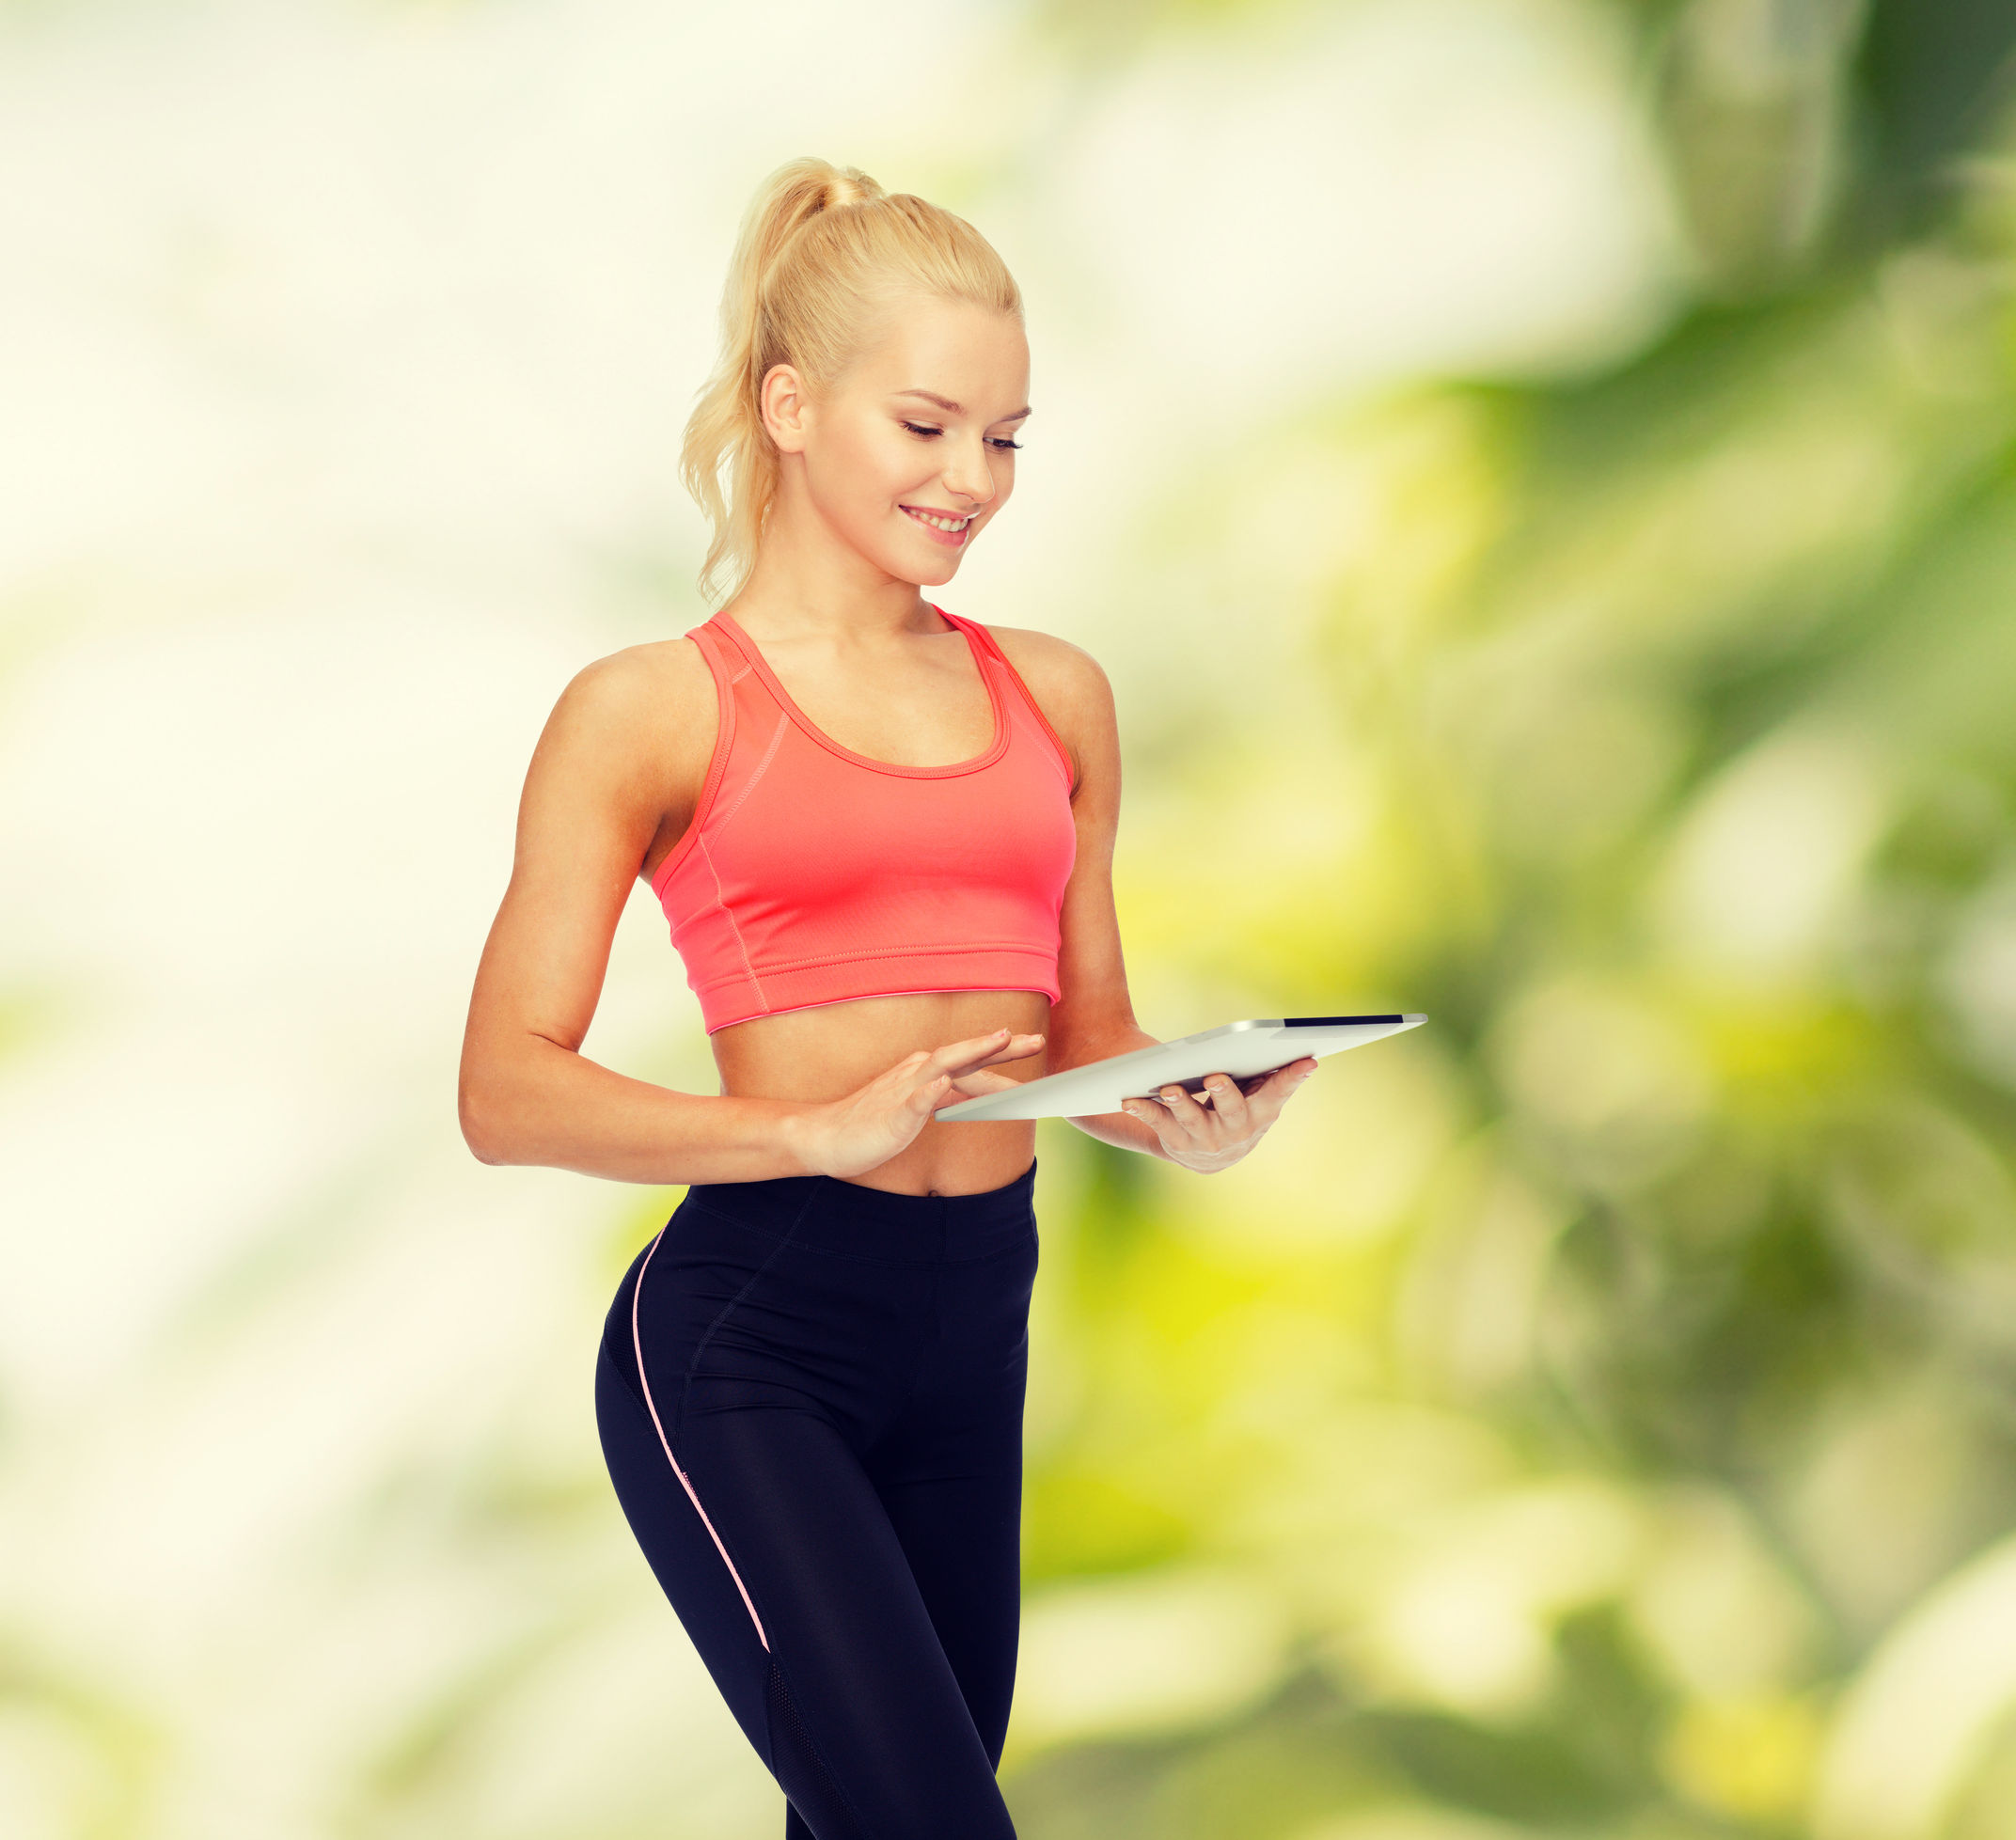 Woman workout training with app and ipad.